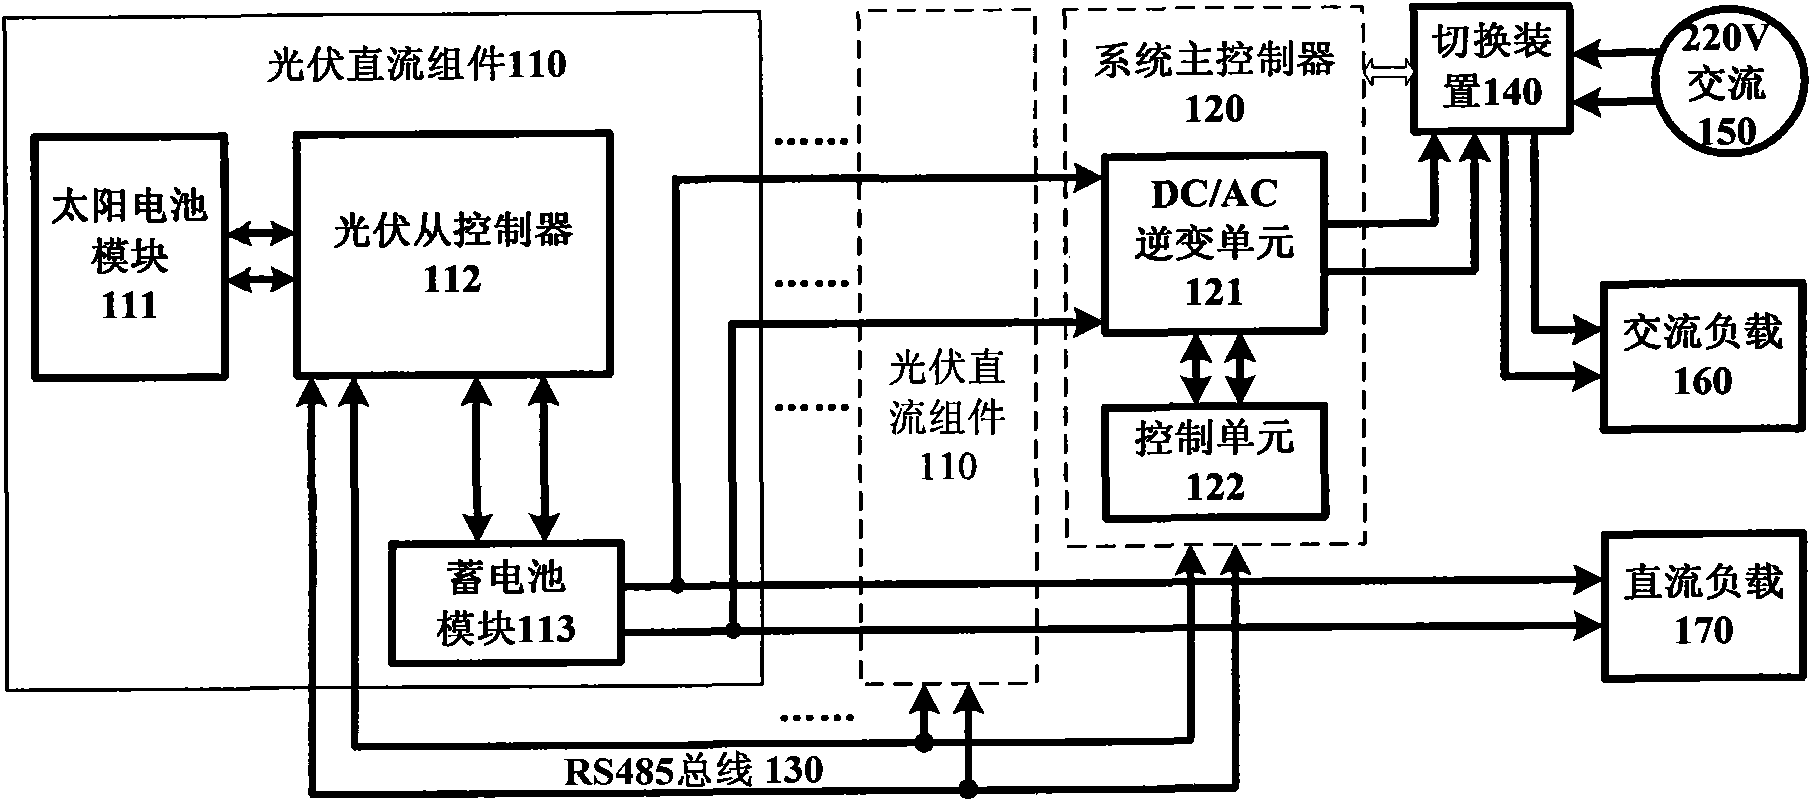 Photovoltaic power generation control system